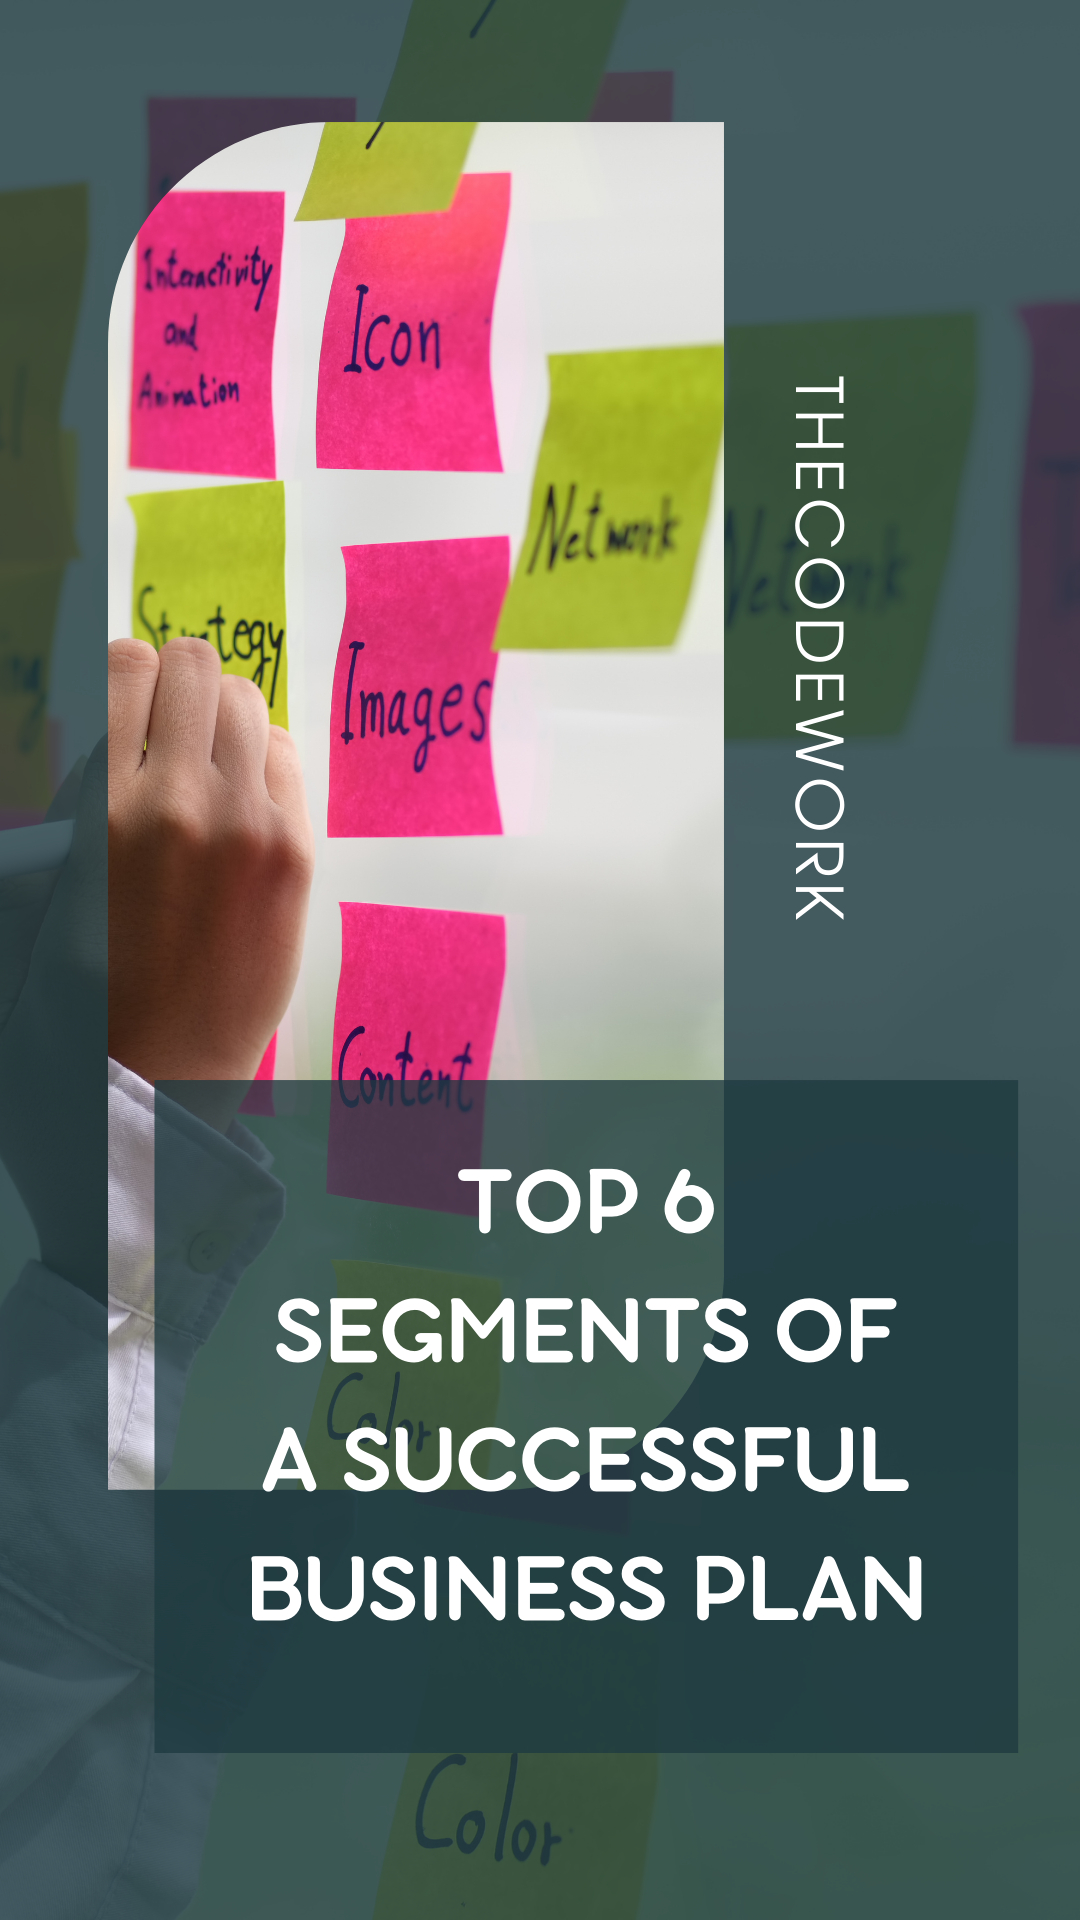 Top 6 segments of a successful business plan 